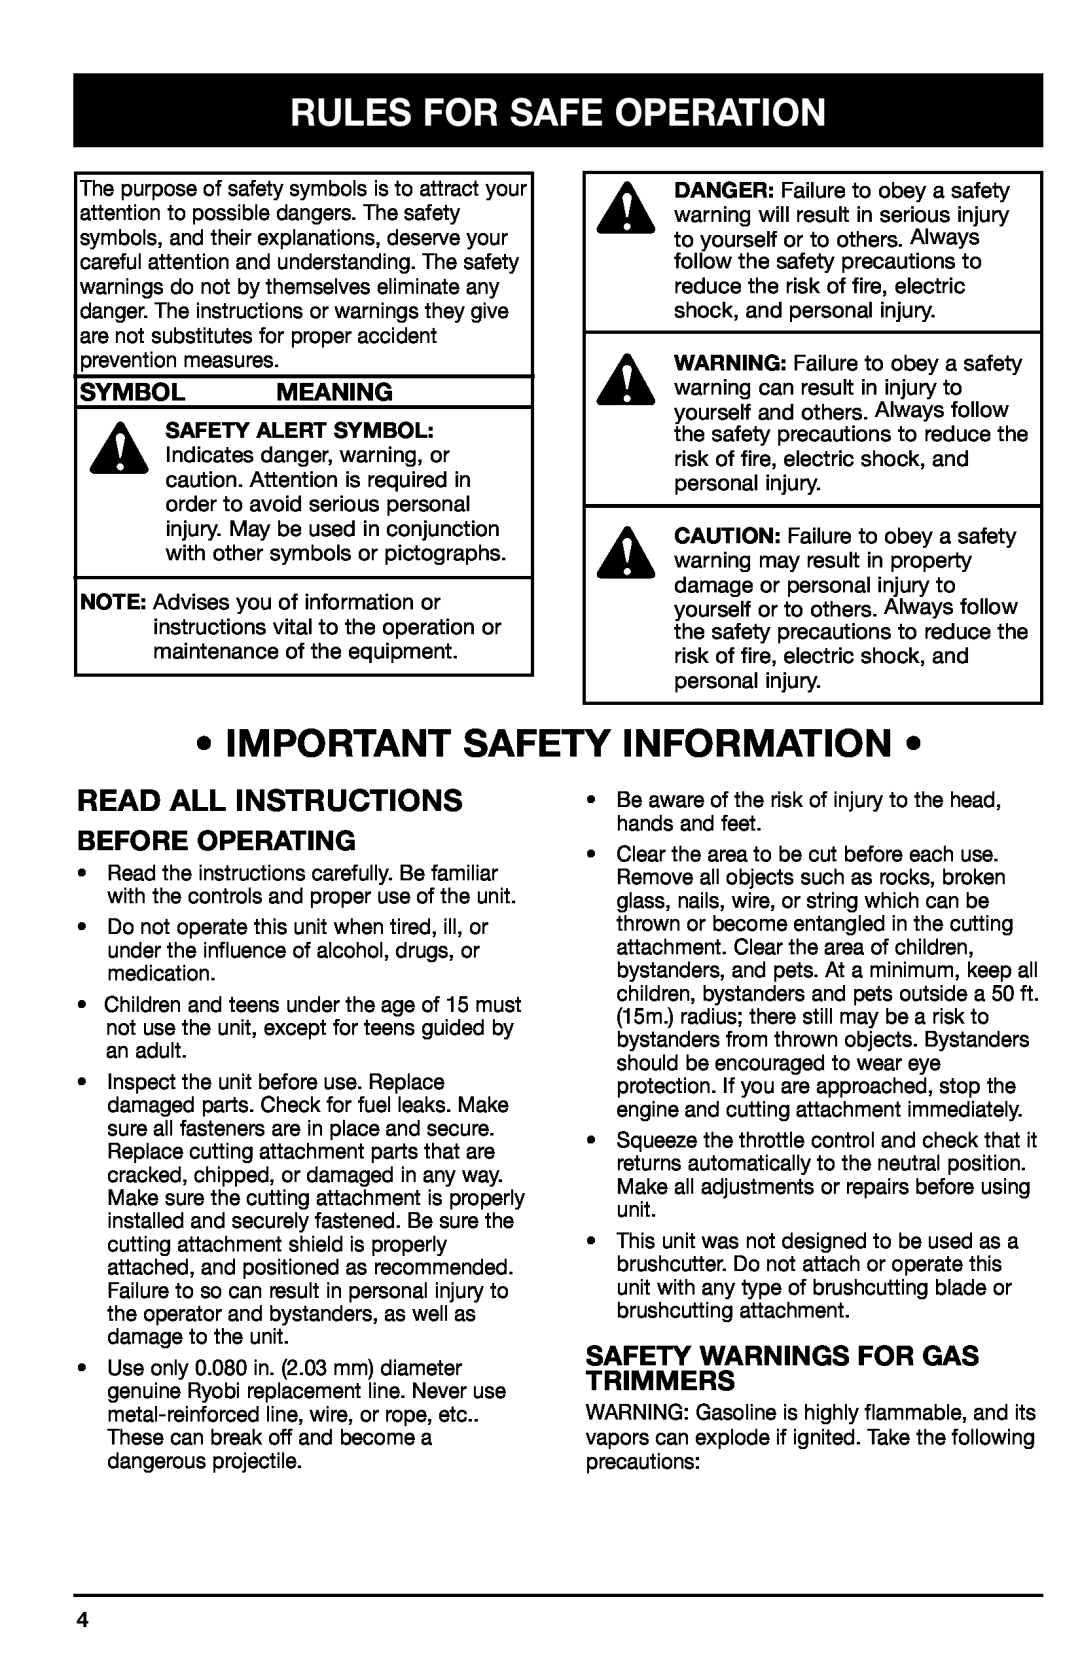 Ryobi 700r manual Rules For Safe Operation, Read All Instructions, Before Operating, Safety Warnings For Gas Trimmers 